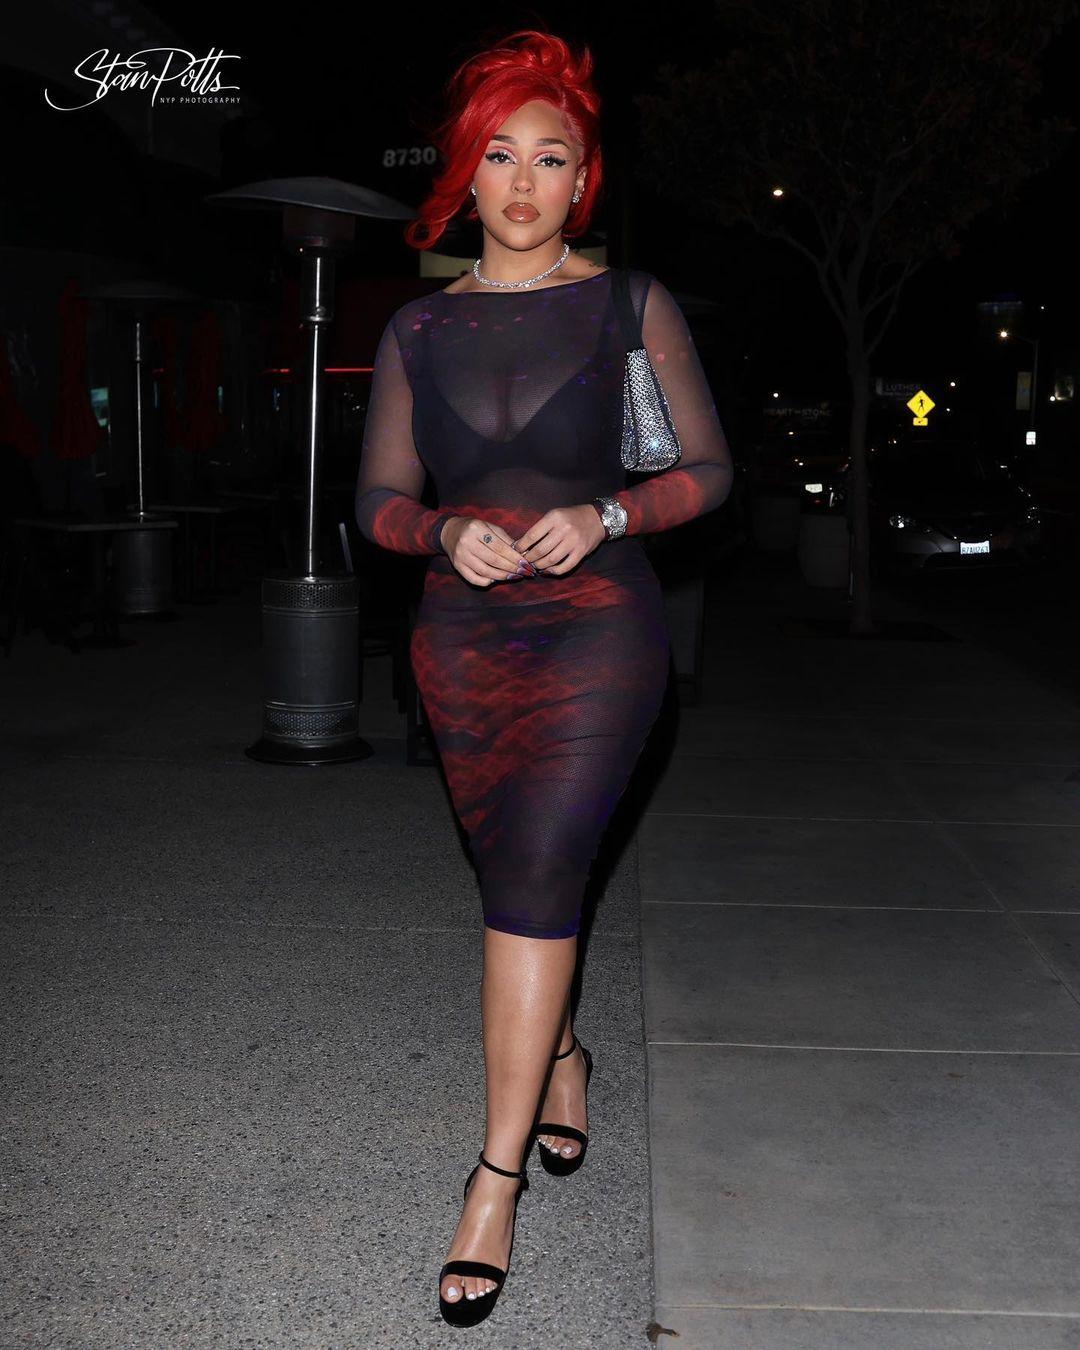 class="content__text"
 🔥WOODS by Jordyn🔥 Jordyn Woods puts on a sexy and cheeky display in a sheer gown, which highlights her curvy figure, as she steps out to dinner at Catch LA in West Hollywood, Ca. ~| @jordynwoods@woodsbyjordyn |~ 📸 &amp; © by @shotbynyp (unauthorized use of photos prohibited) ~| #jordynwoods 
 